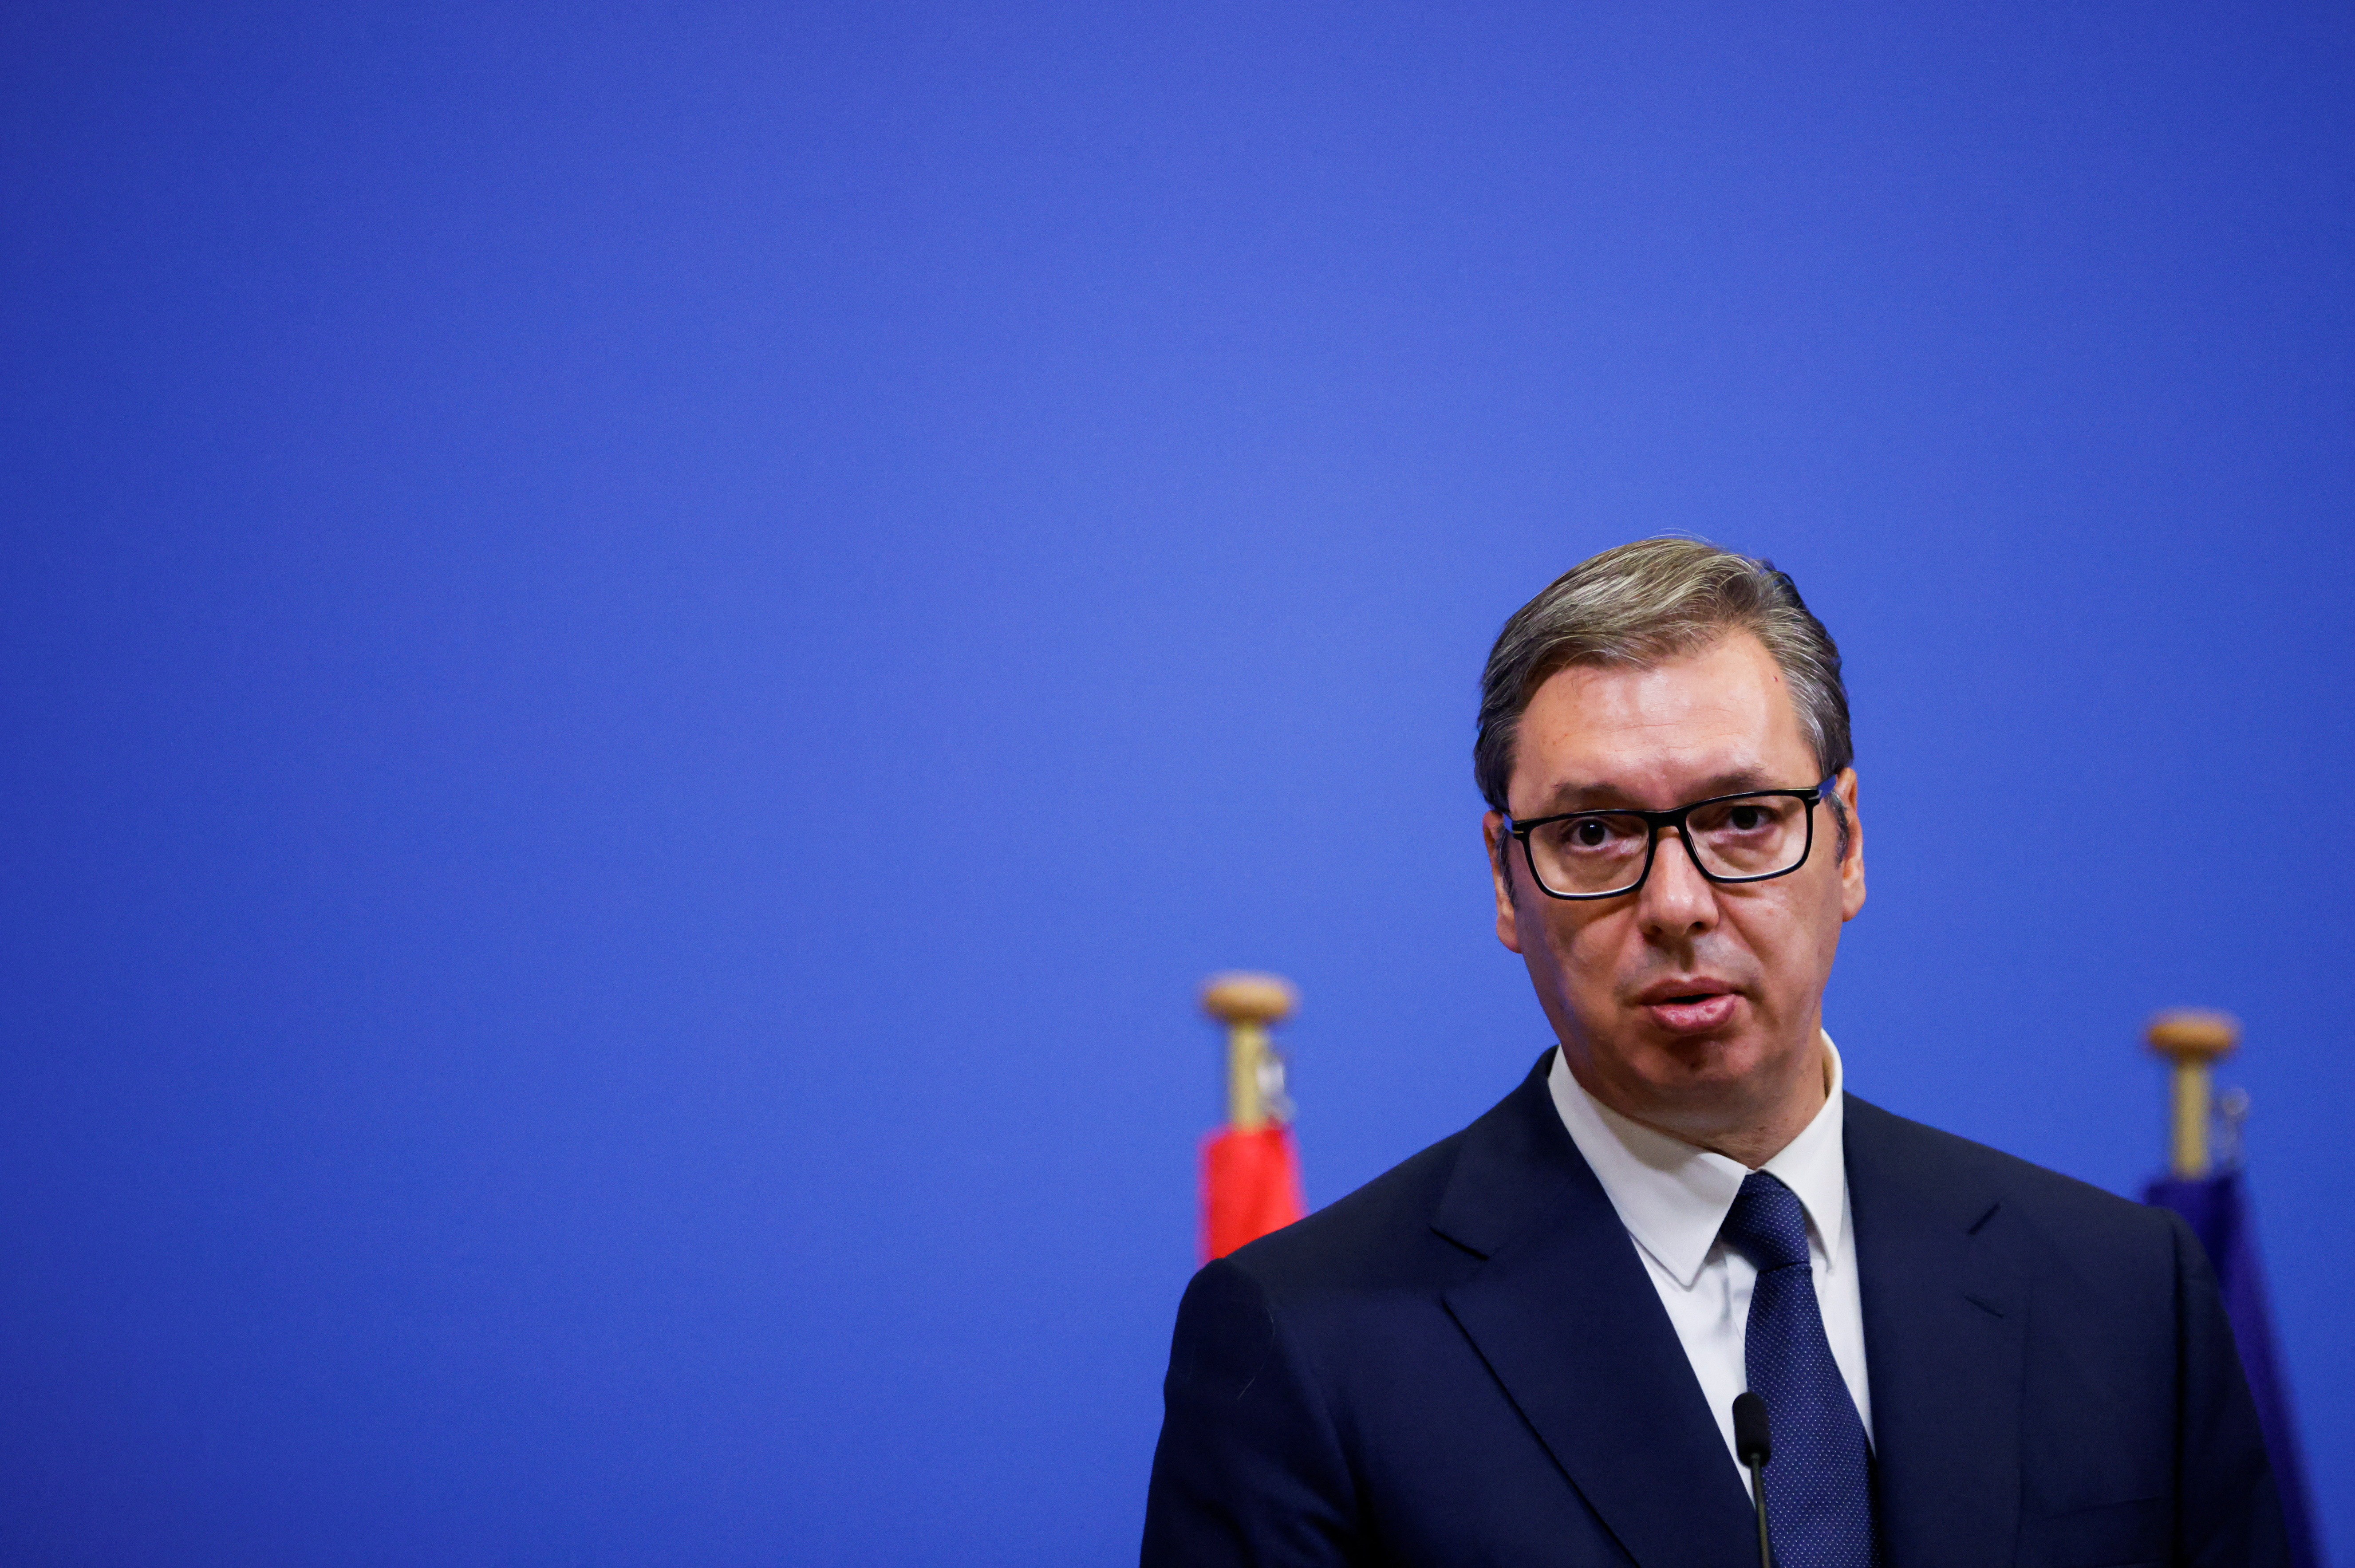 NATO's Stoltenberg meets Serbian President Vucic, in Brussels